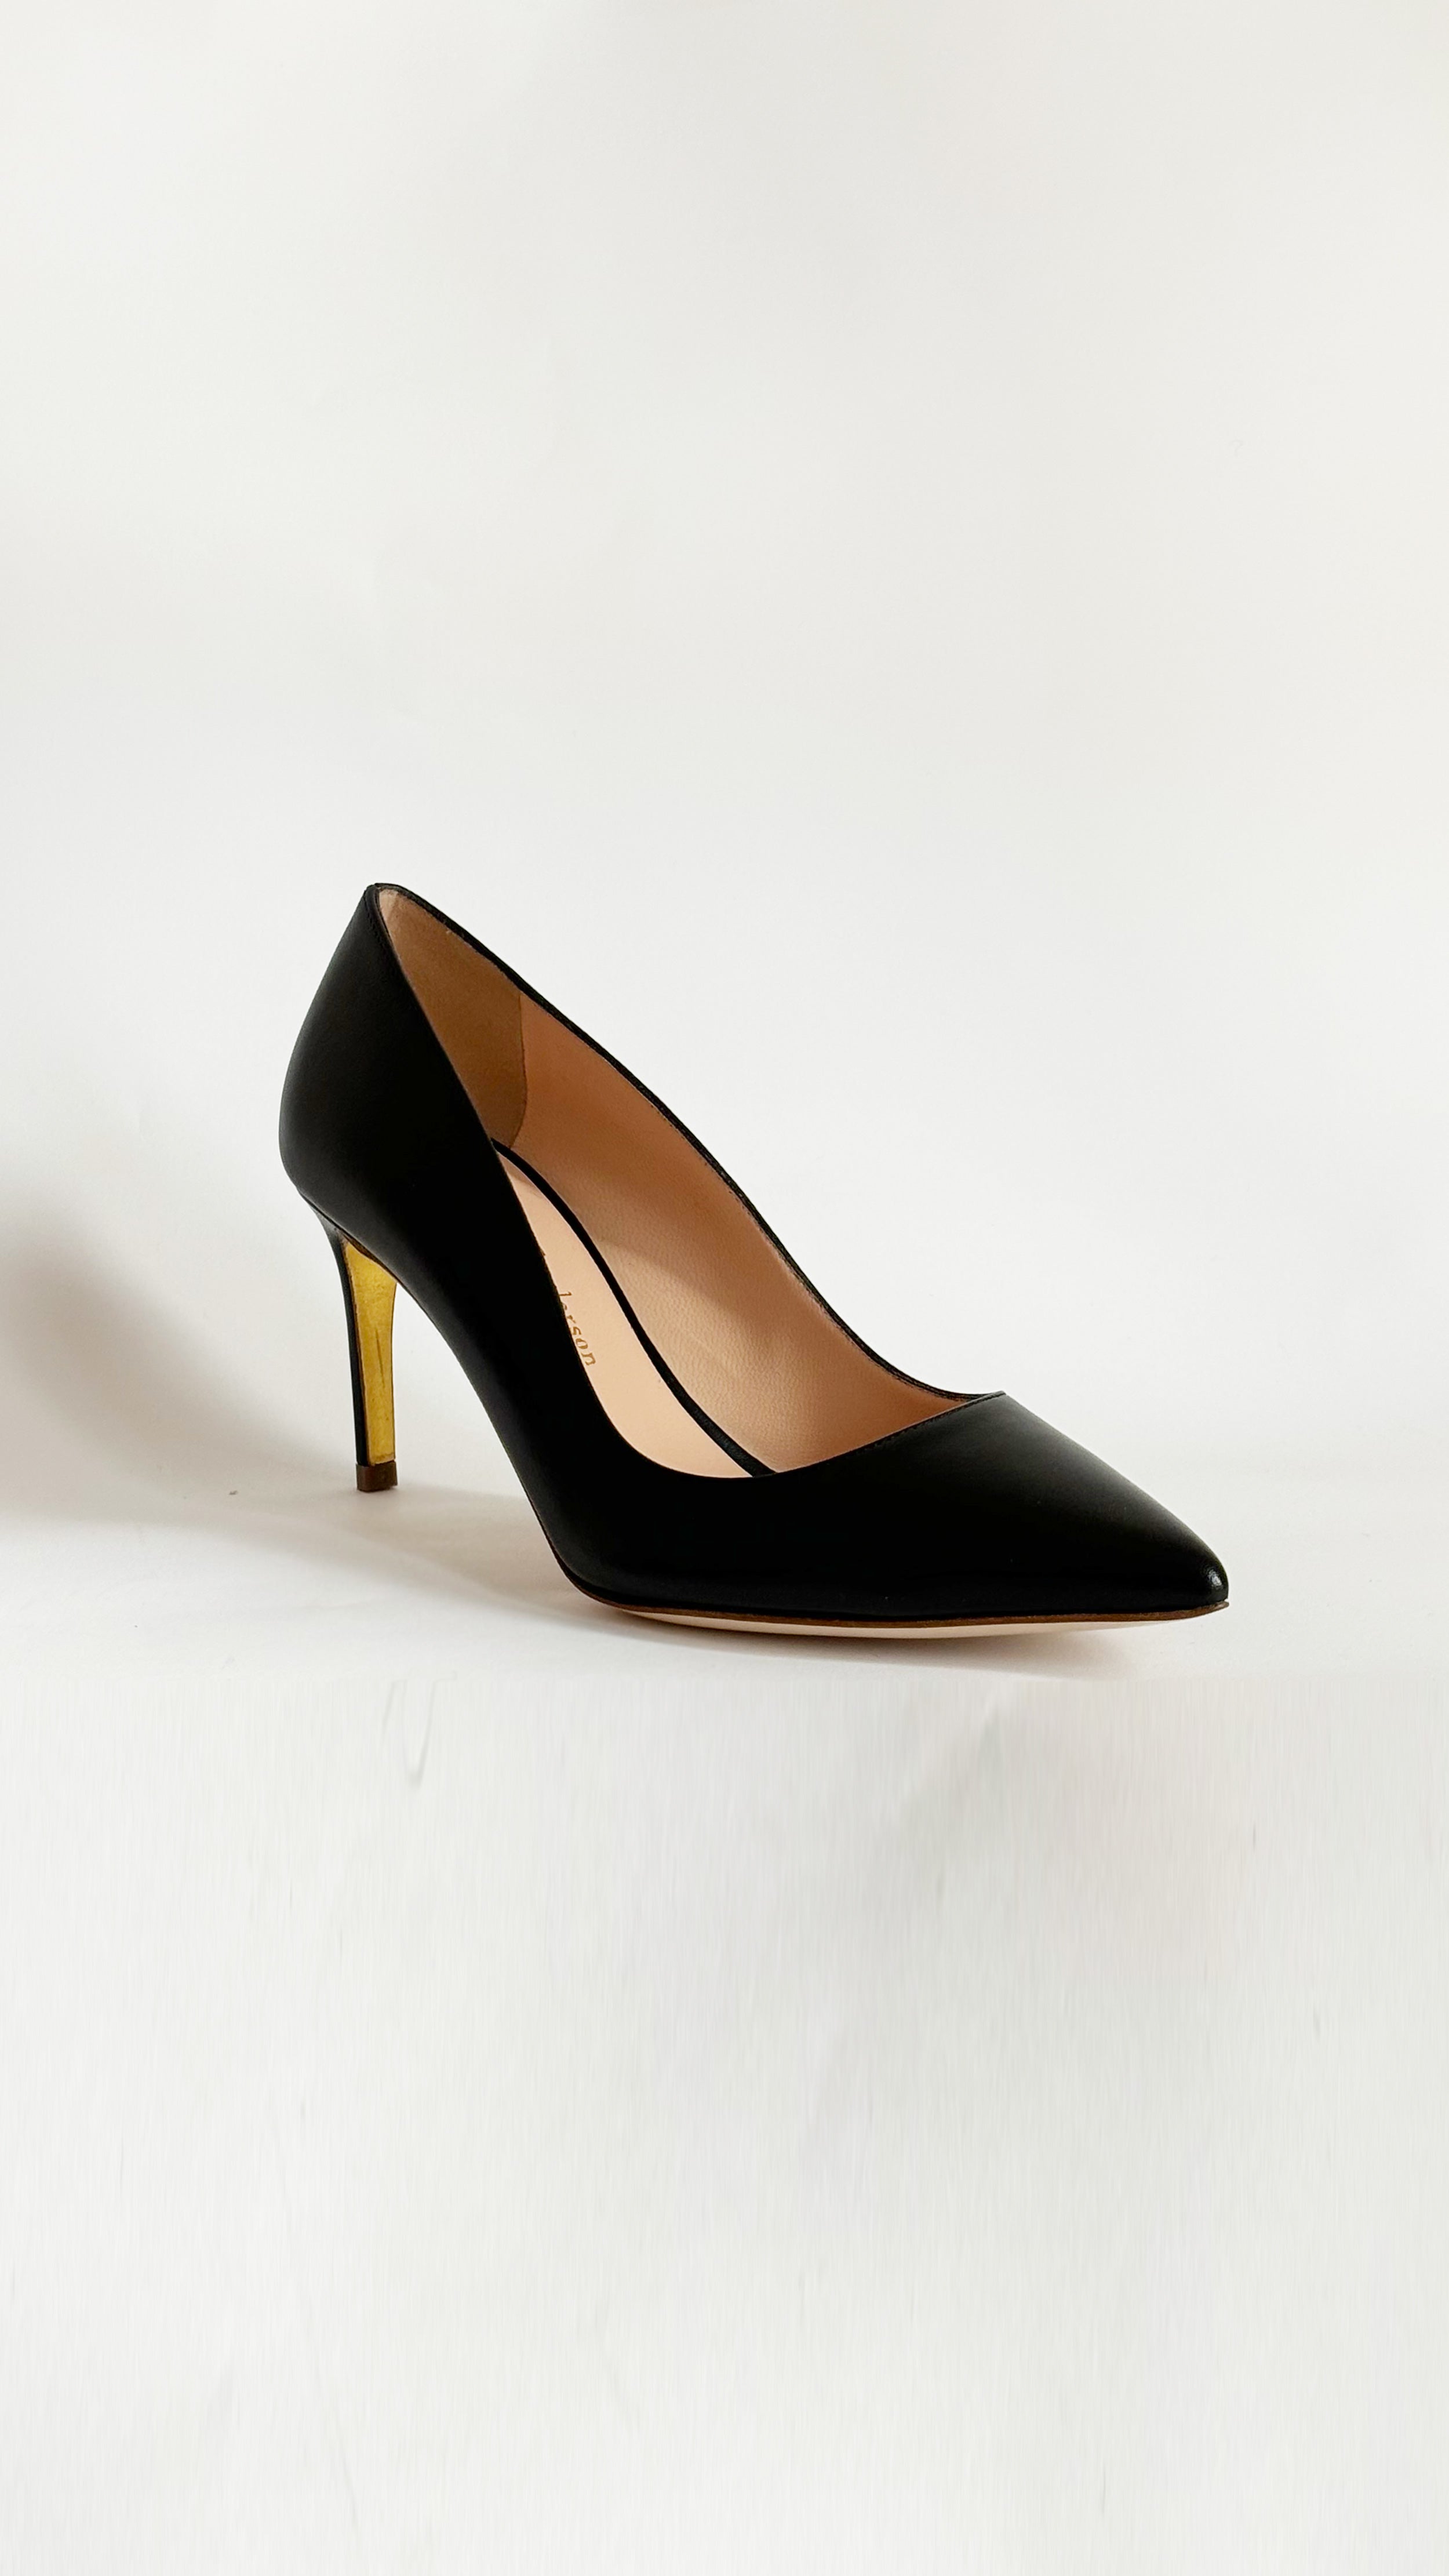 Rupert Sanderson New Nada in Black Heel, a timeless classic crafted in soft black leather. Its elegant silhouette is complemented by a slim 75mm stiletto heel. Handmade in Italy. Shown from the front and side.